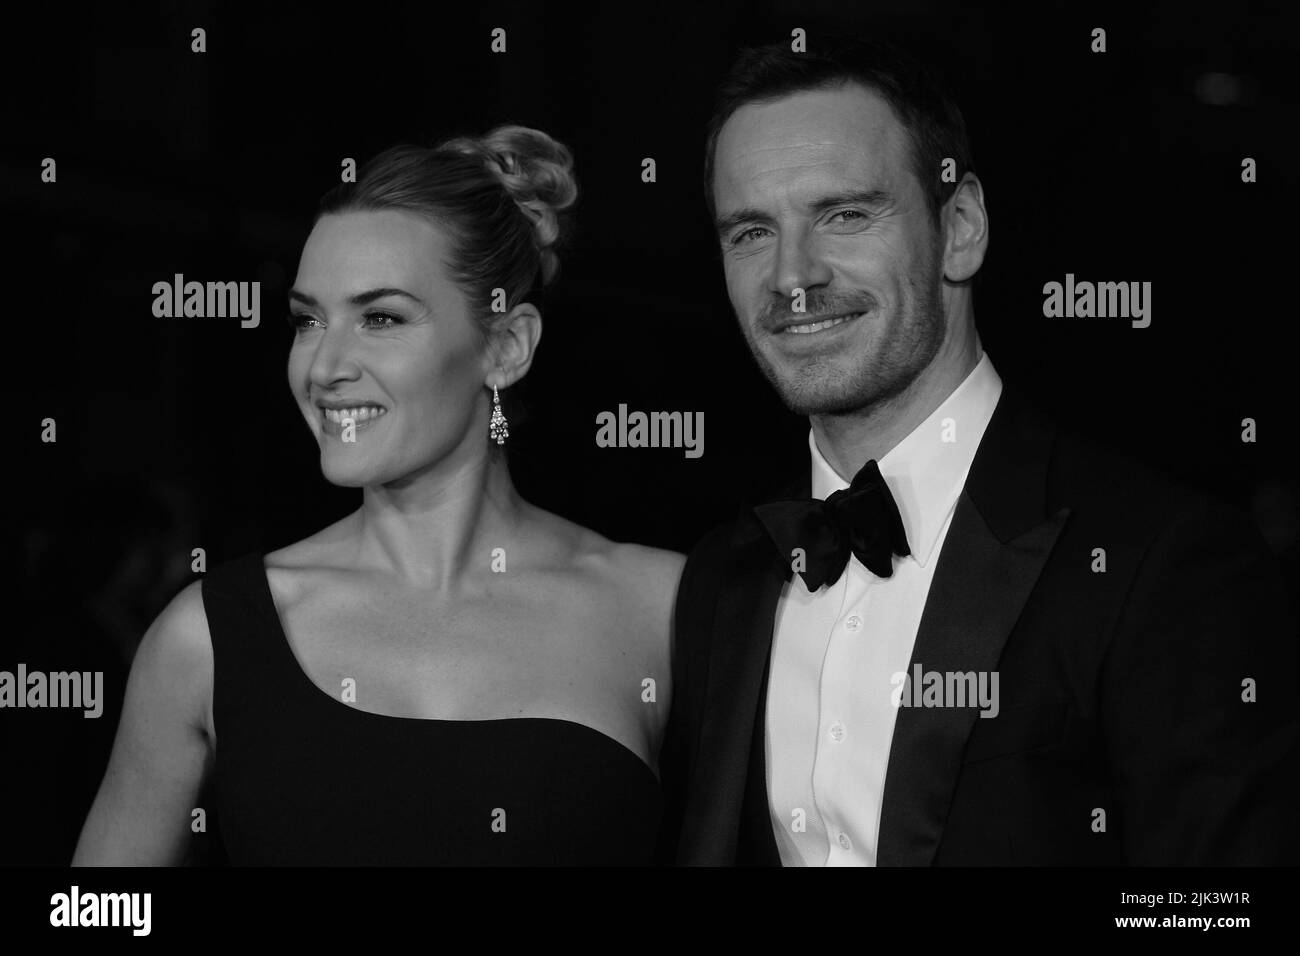 London, UK, 18th Oct 2015: Kate Winslet and Michael Fassbender attend the Steve Jobs premiere and closing night gala, 59th BFI London Film Festival at the Odeon Leicester Square in London. Stock Photo